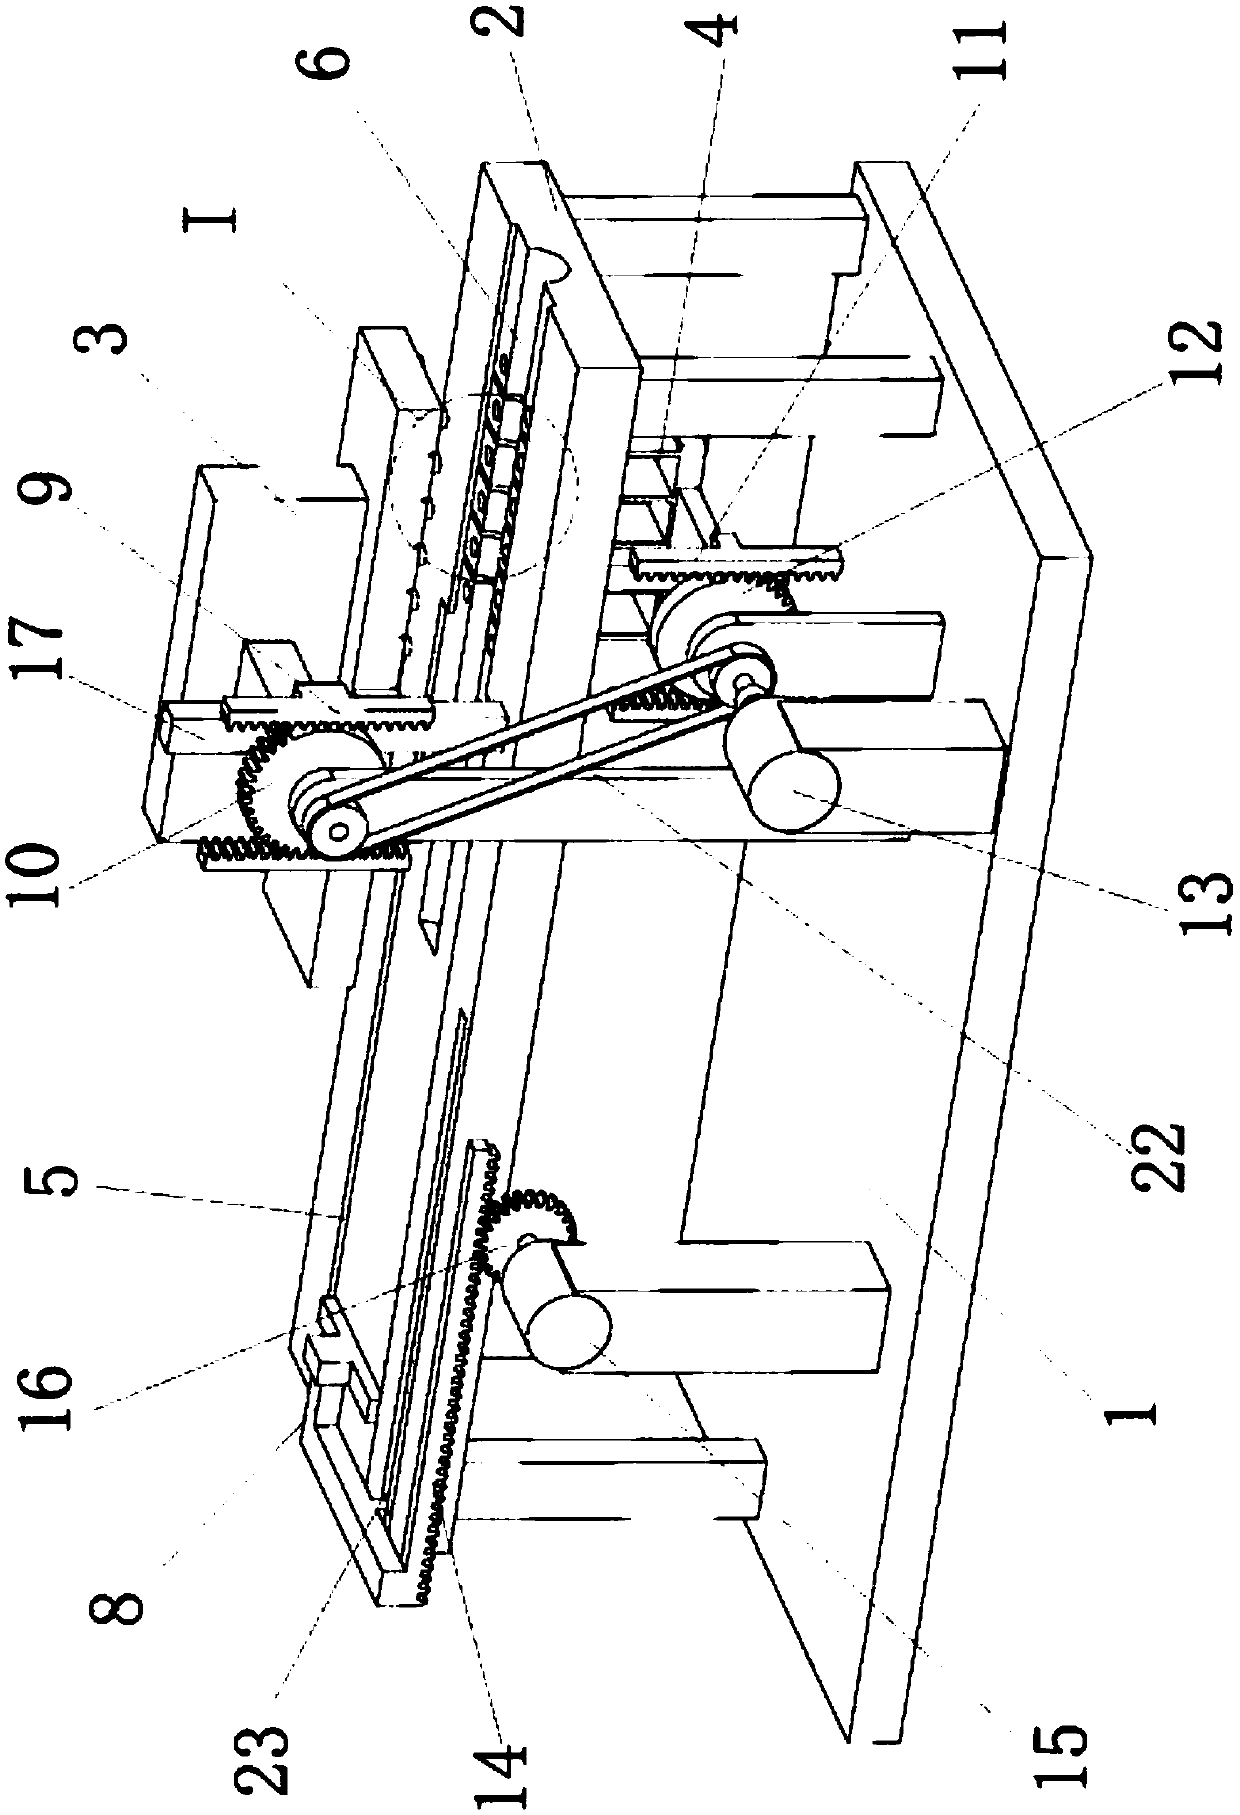 Machining device for automobile parts